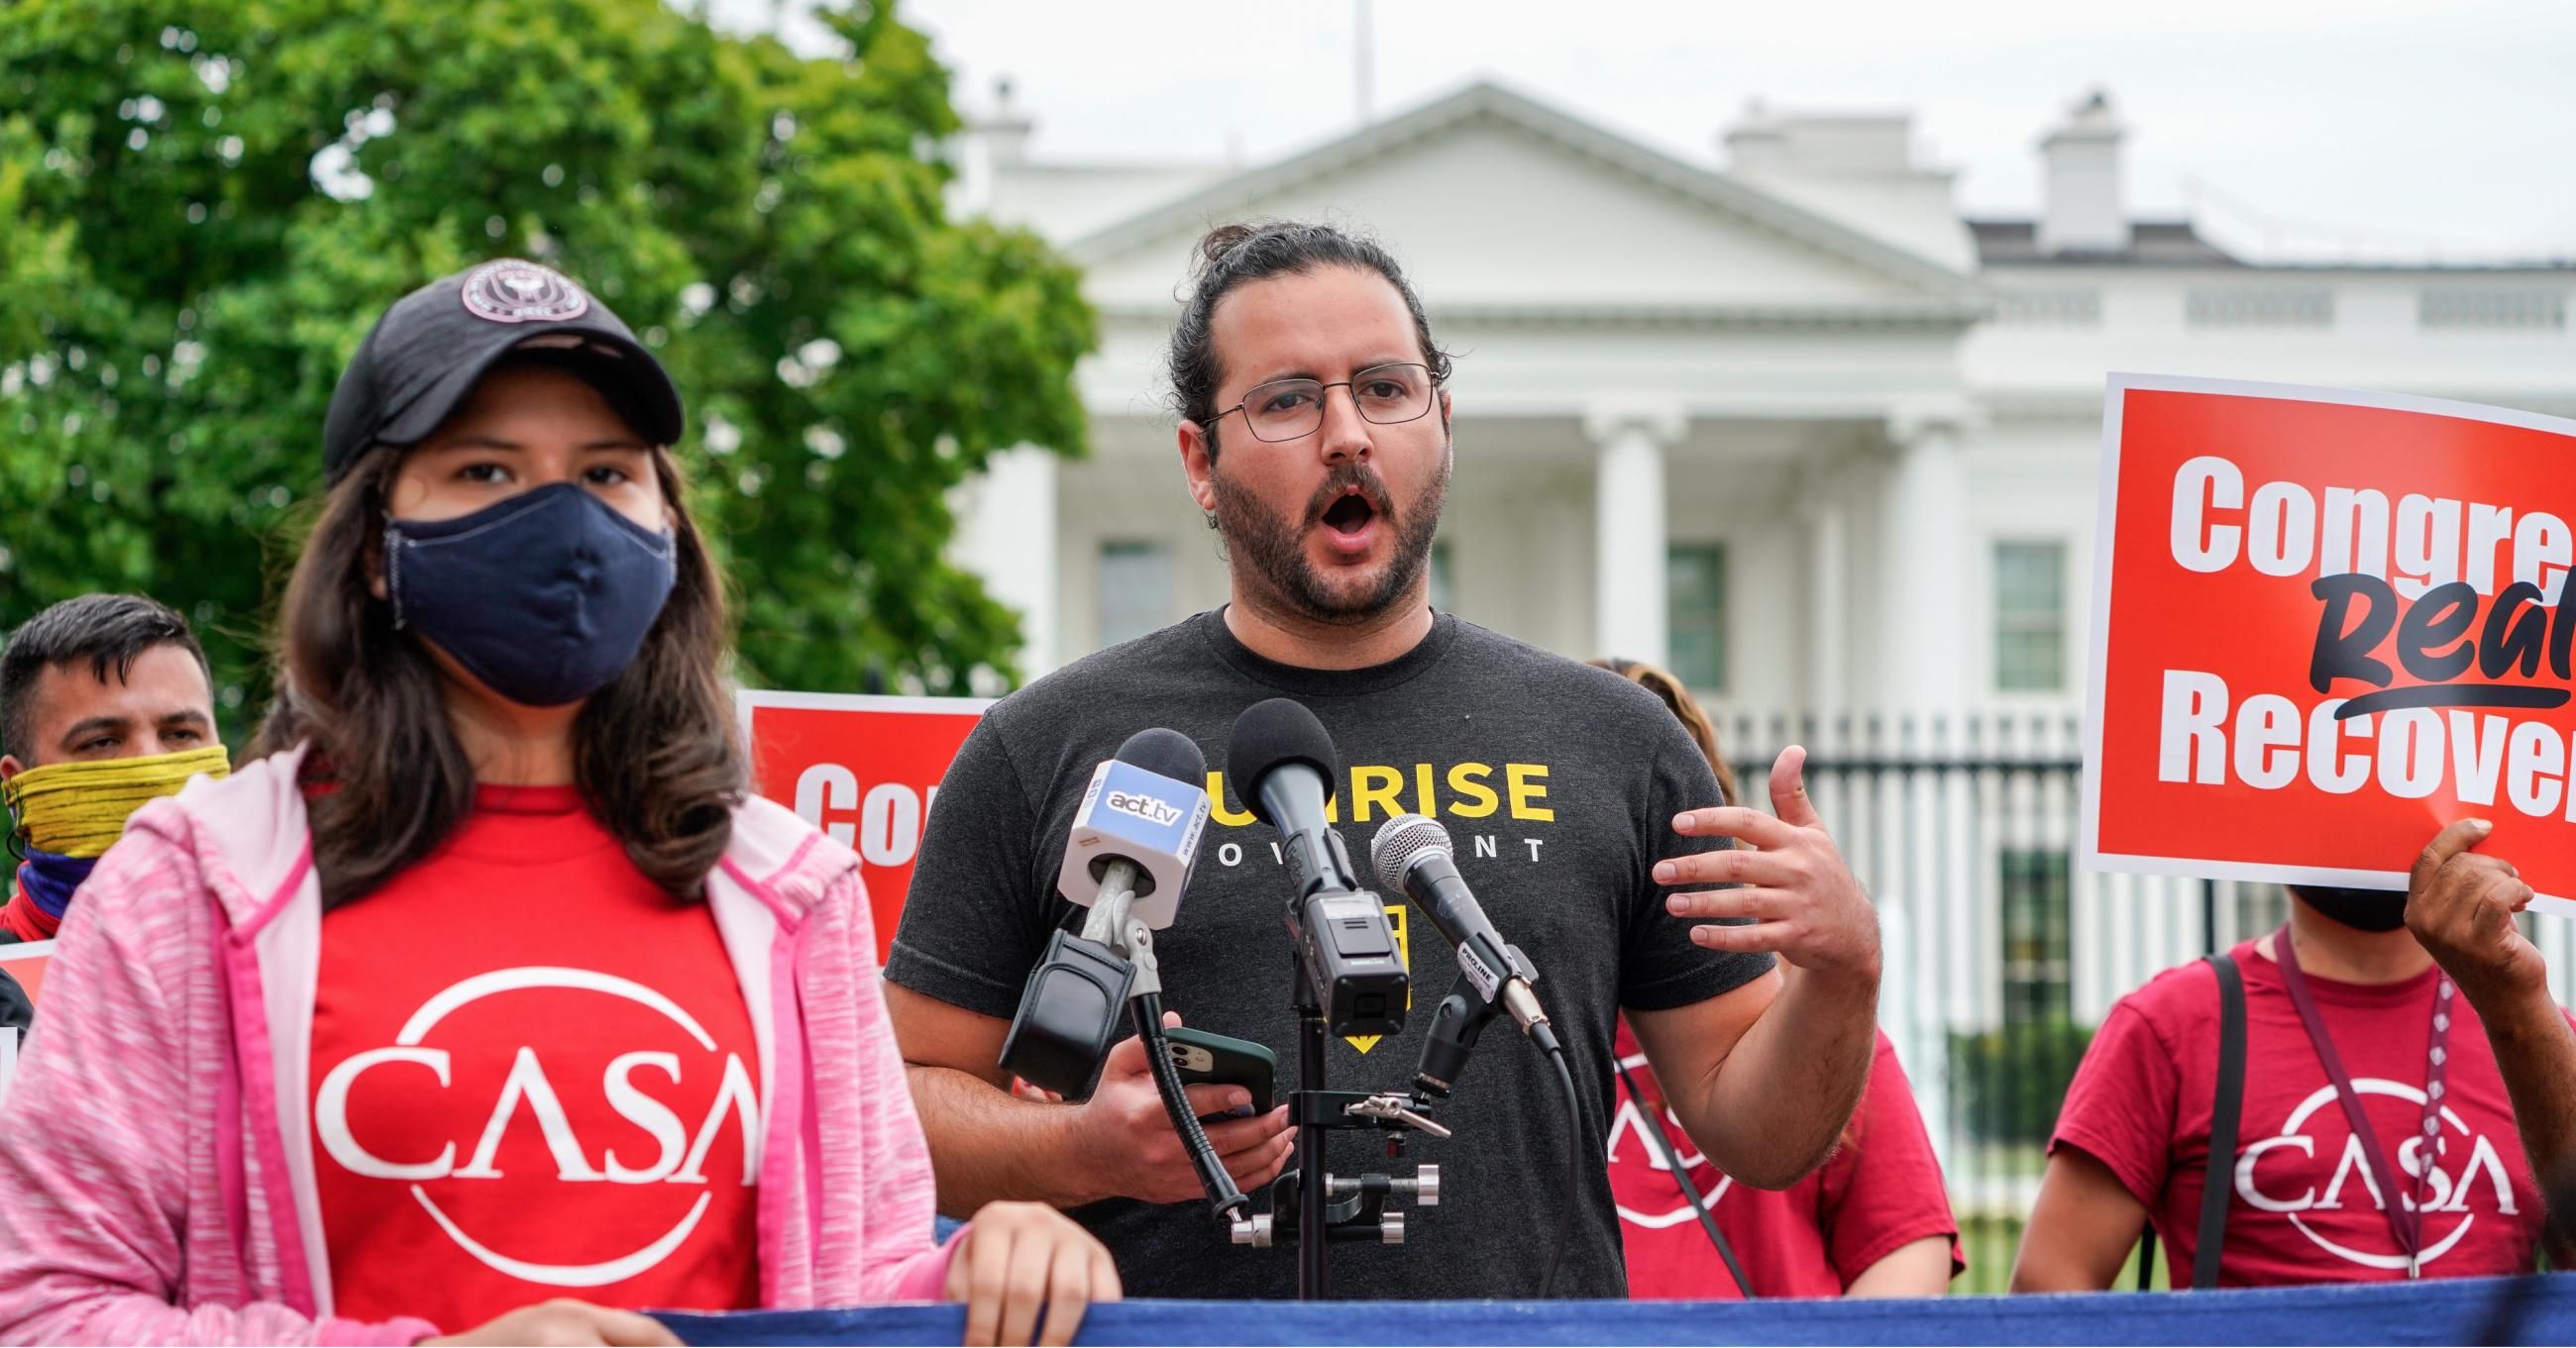 Sunrise Movement activist Evan Weber speaks at a demonstration pressuring President Joe Biden to not compromise on election promises regarding the climate emergency, healthcare, jobs, and social justice on May 24, 2021 in Washington, D.C. (Photo: Jemal Countess/Getty Images for Green New Deal Network)